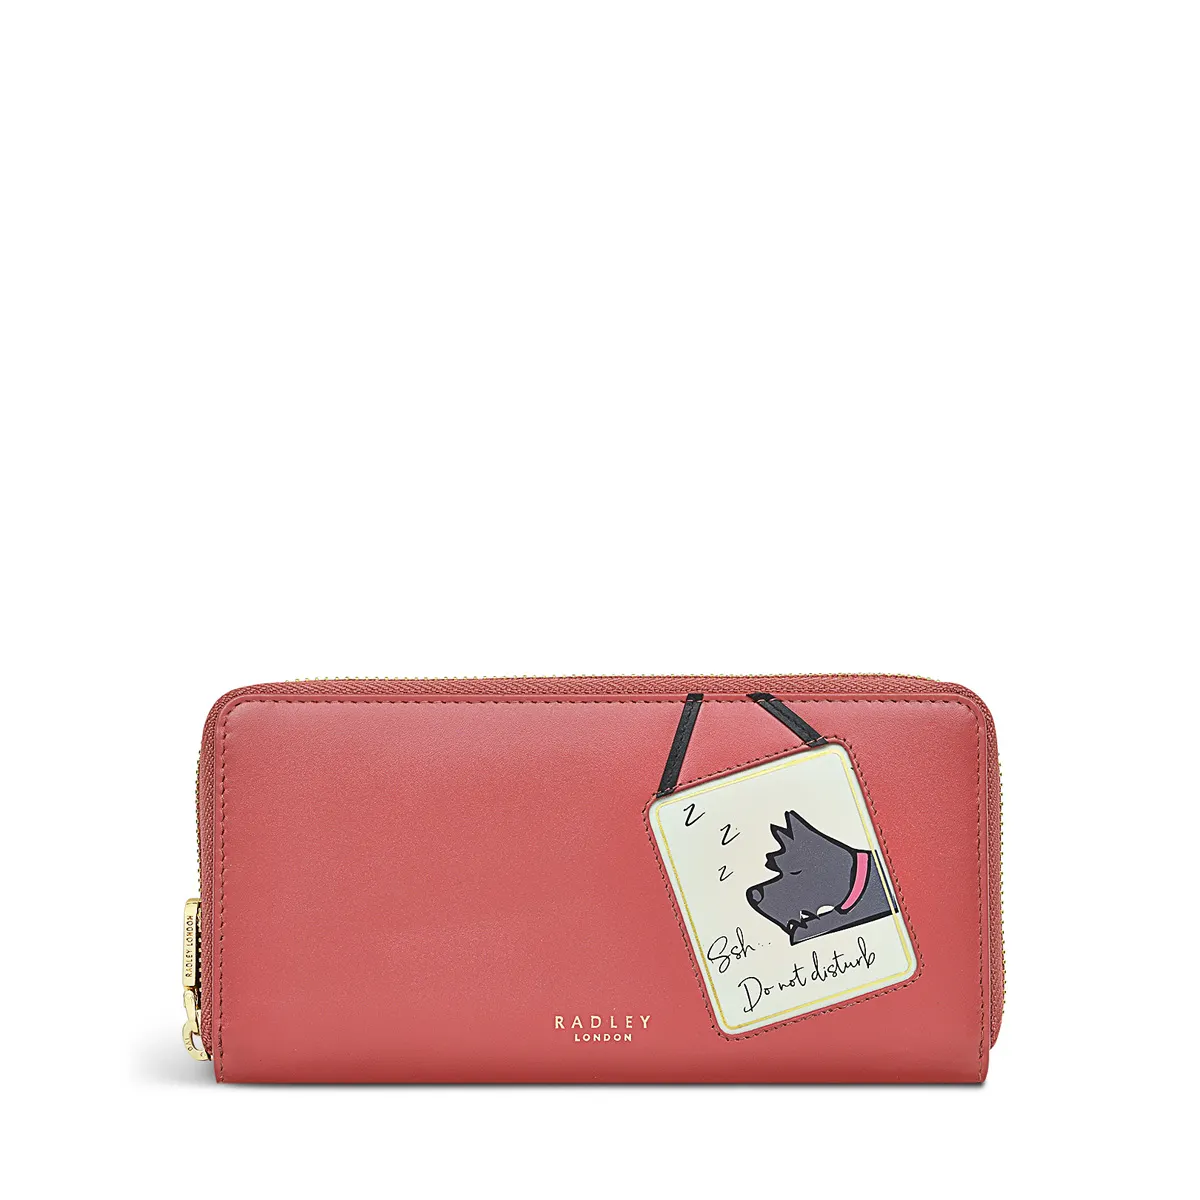 Radley & Friends Dogs Trust Leather Small Zip Top Coin Purse | Compare |  Buchanan Galleries